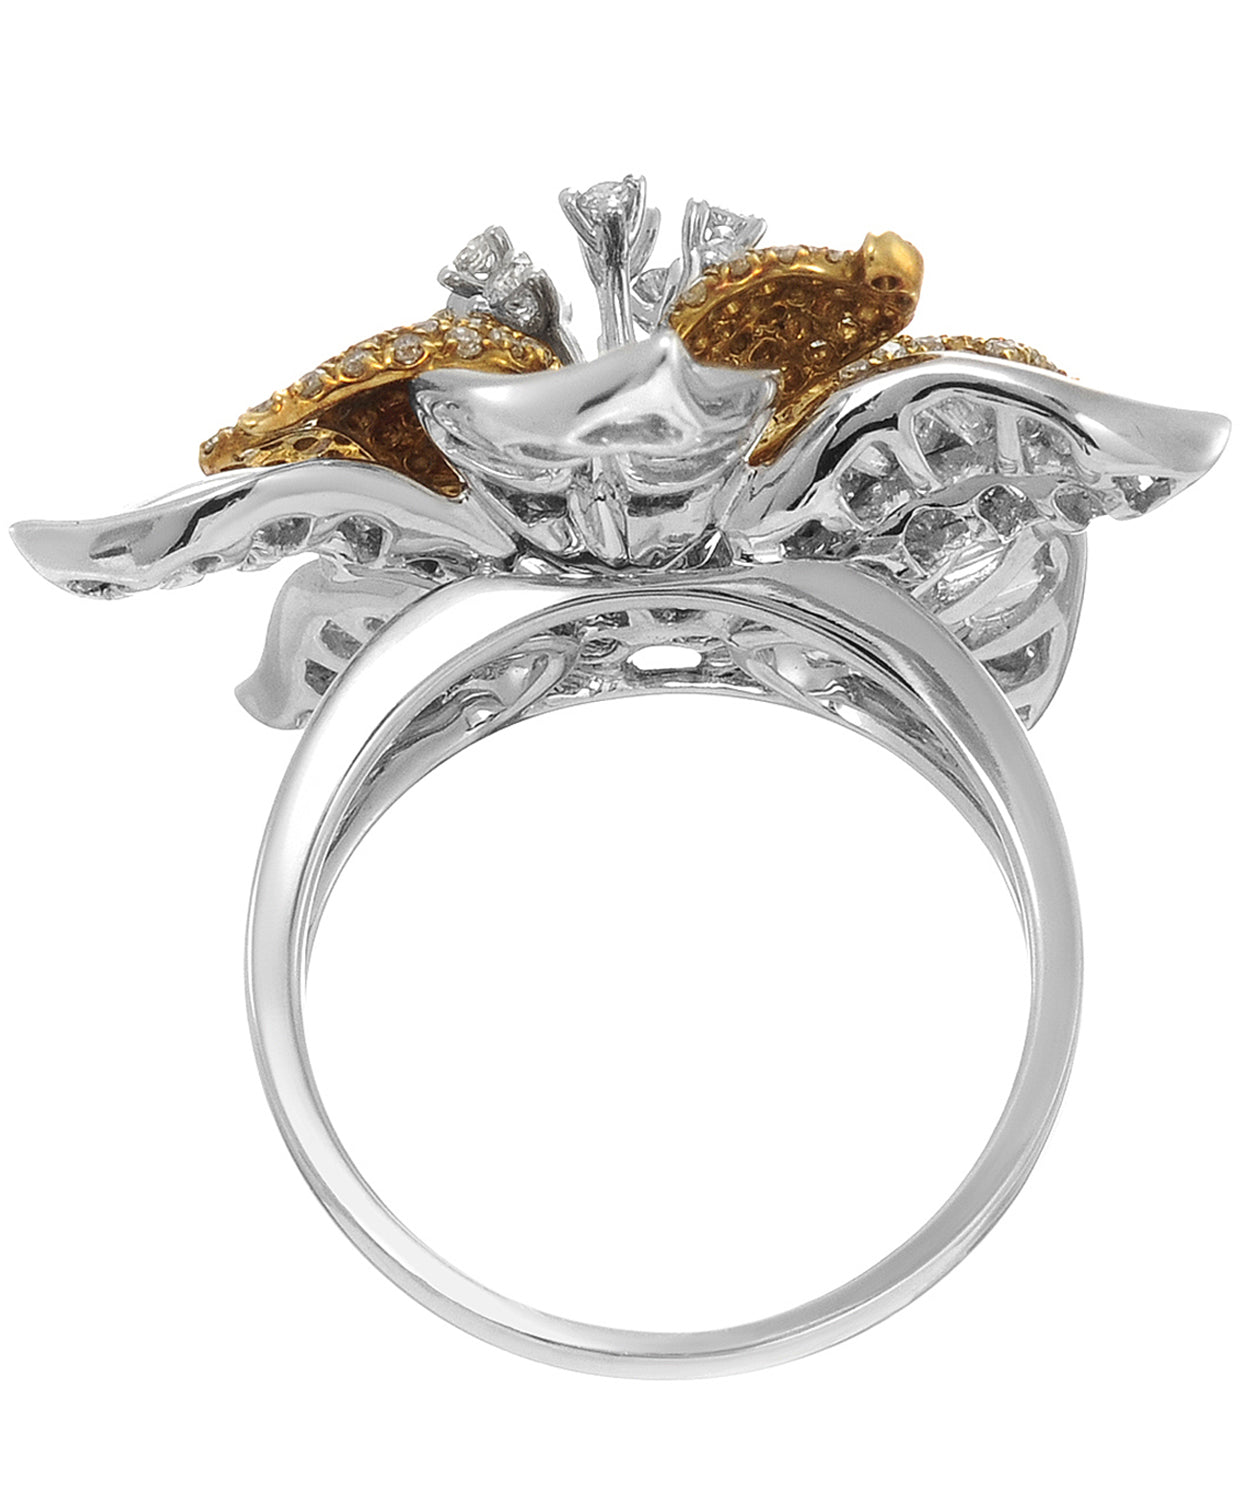 Allure Collection 3.36 ctw Superior Diamond 18k Gold Flower Cocktail Ring View 3